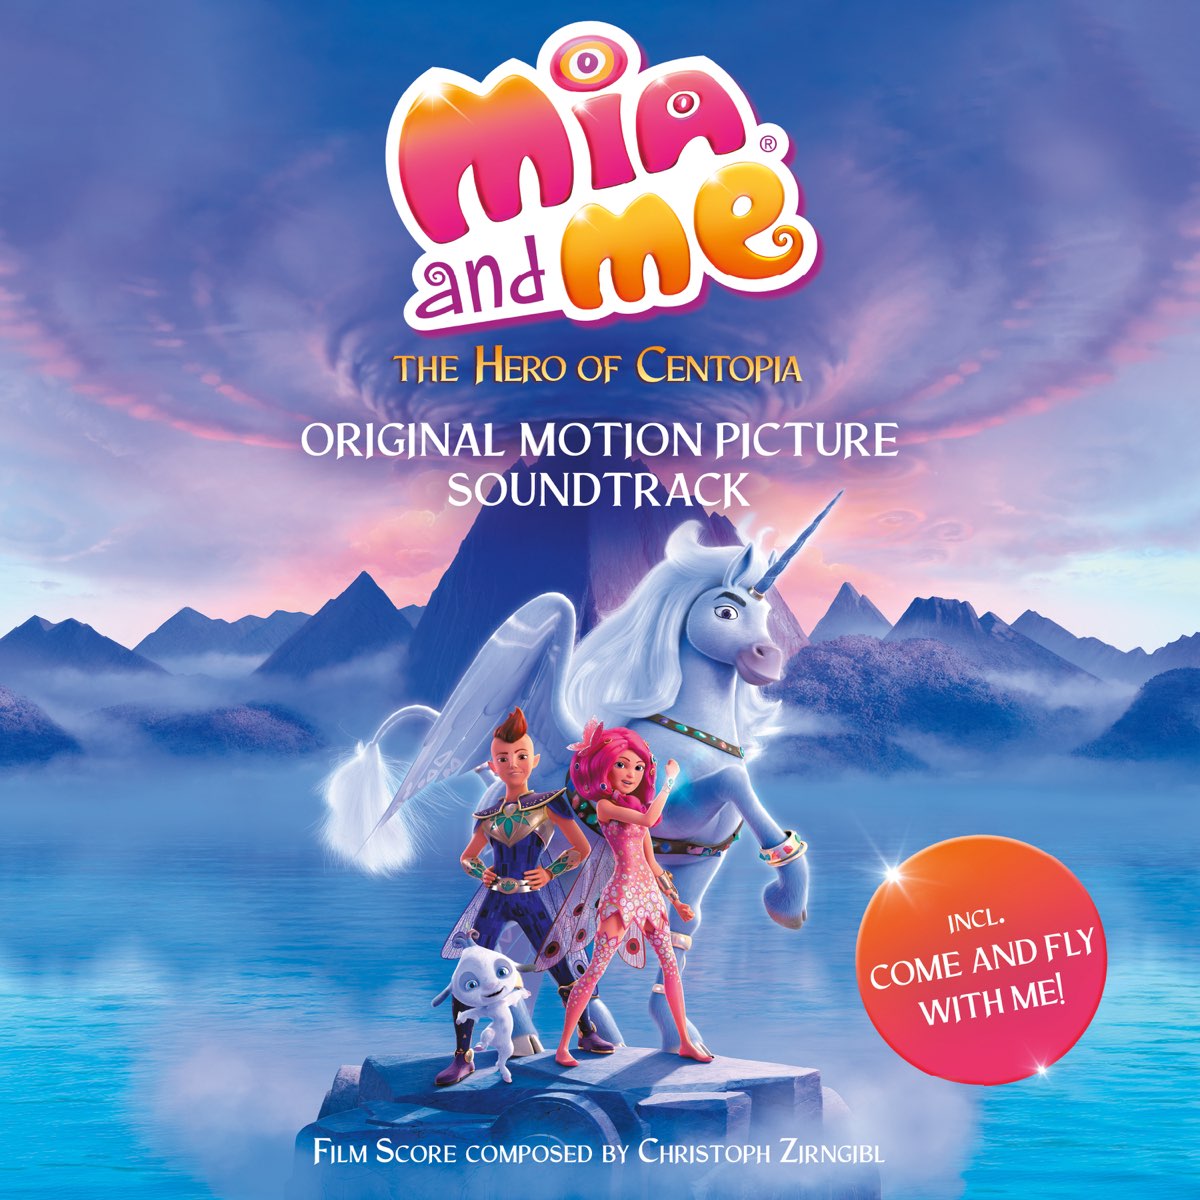 Mia and me - The Hero Of Centopia (Original Motion Picture Soundtrack) -  Album by Various Artists - Apple Music